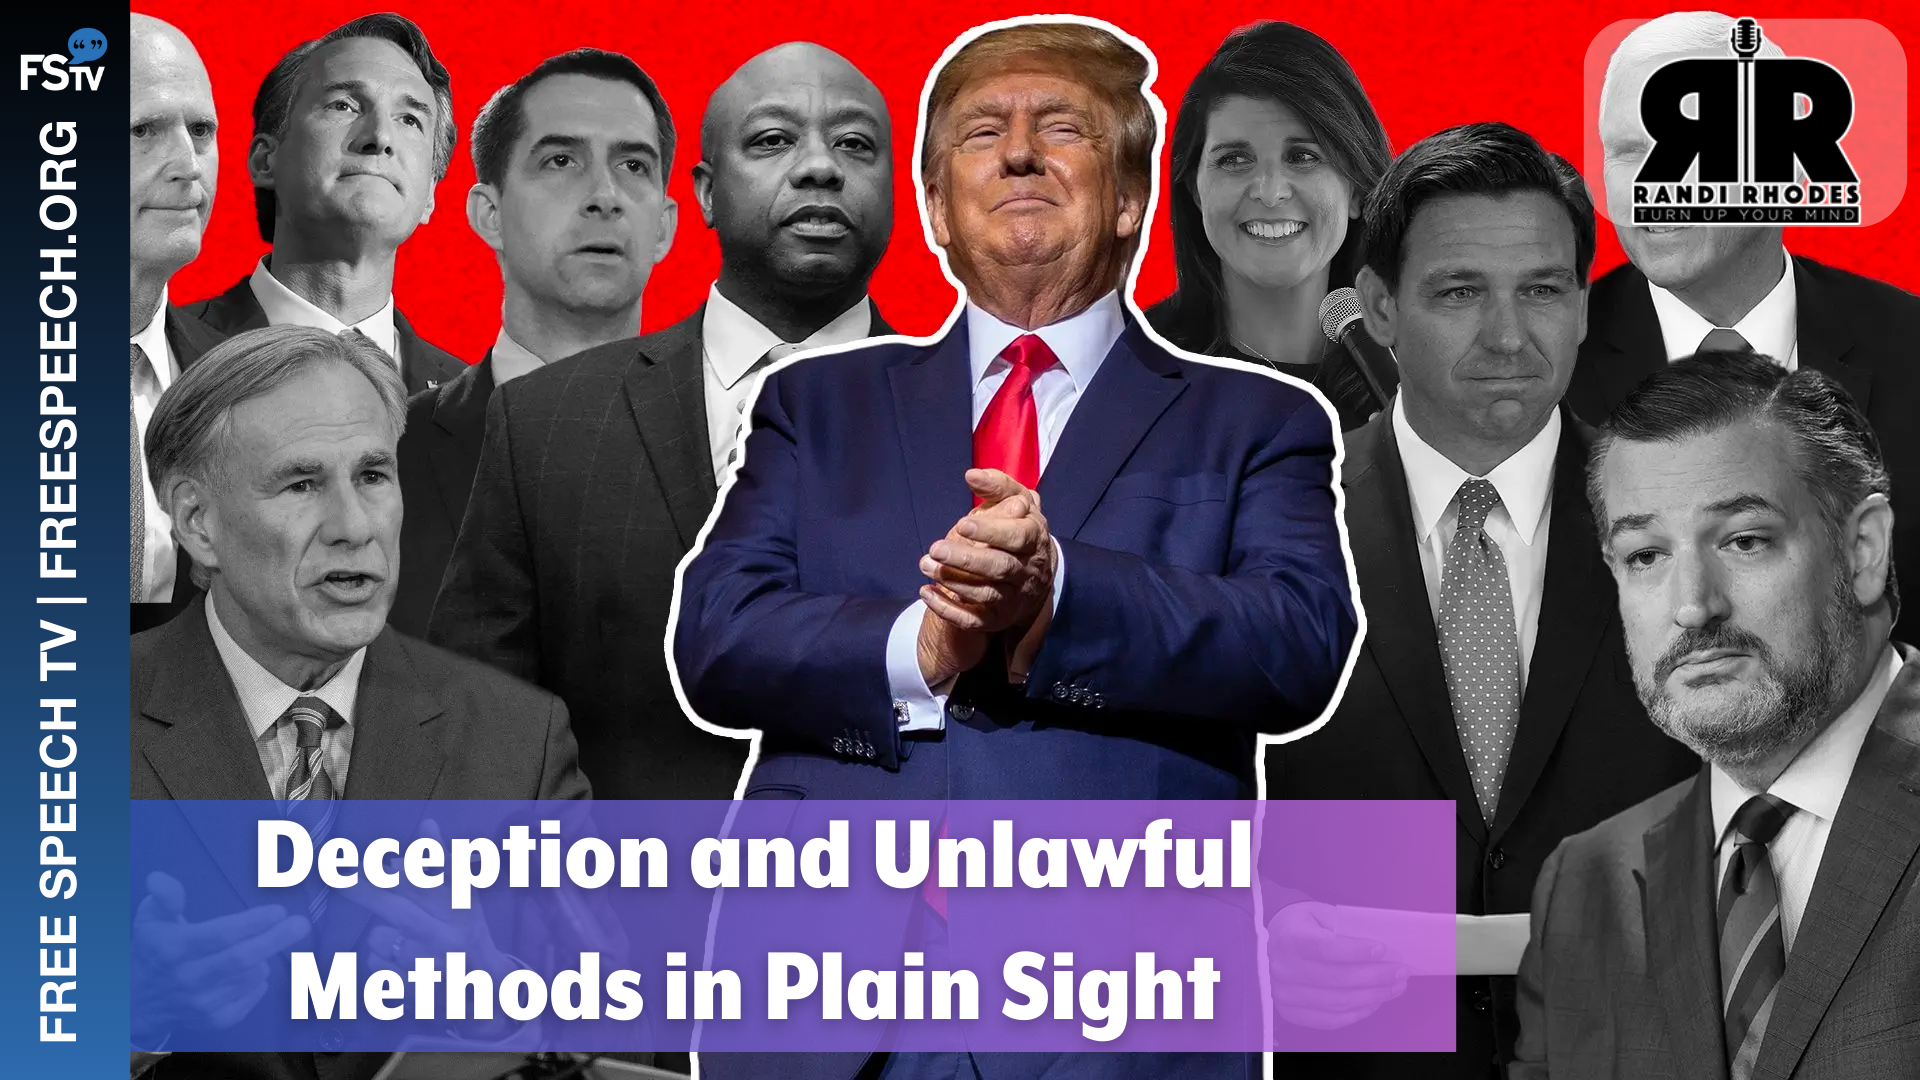 The Randi Rhodes Show | Deception and Unlawful Methods in Plain Sight